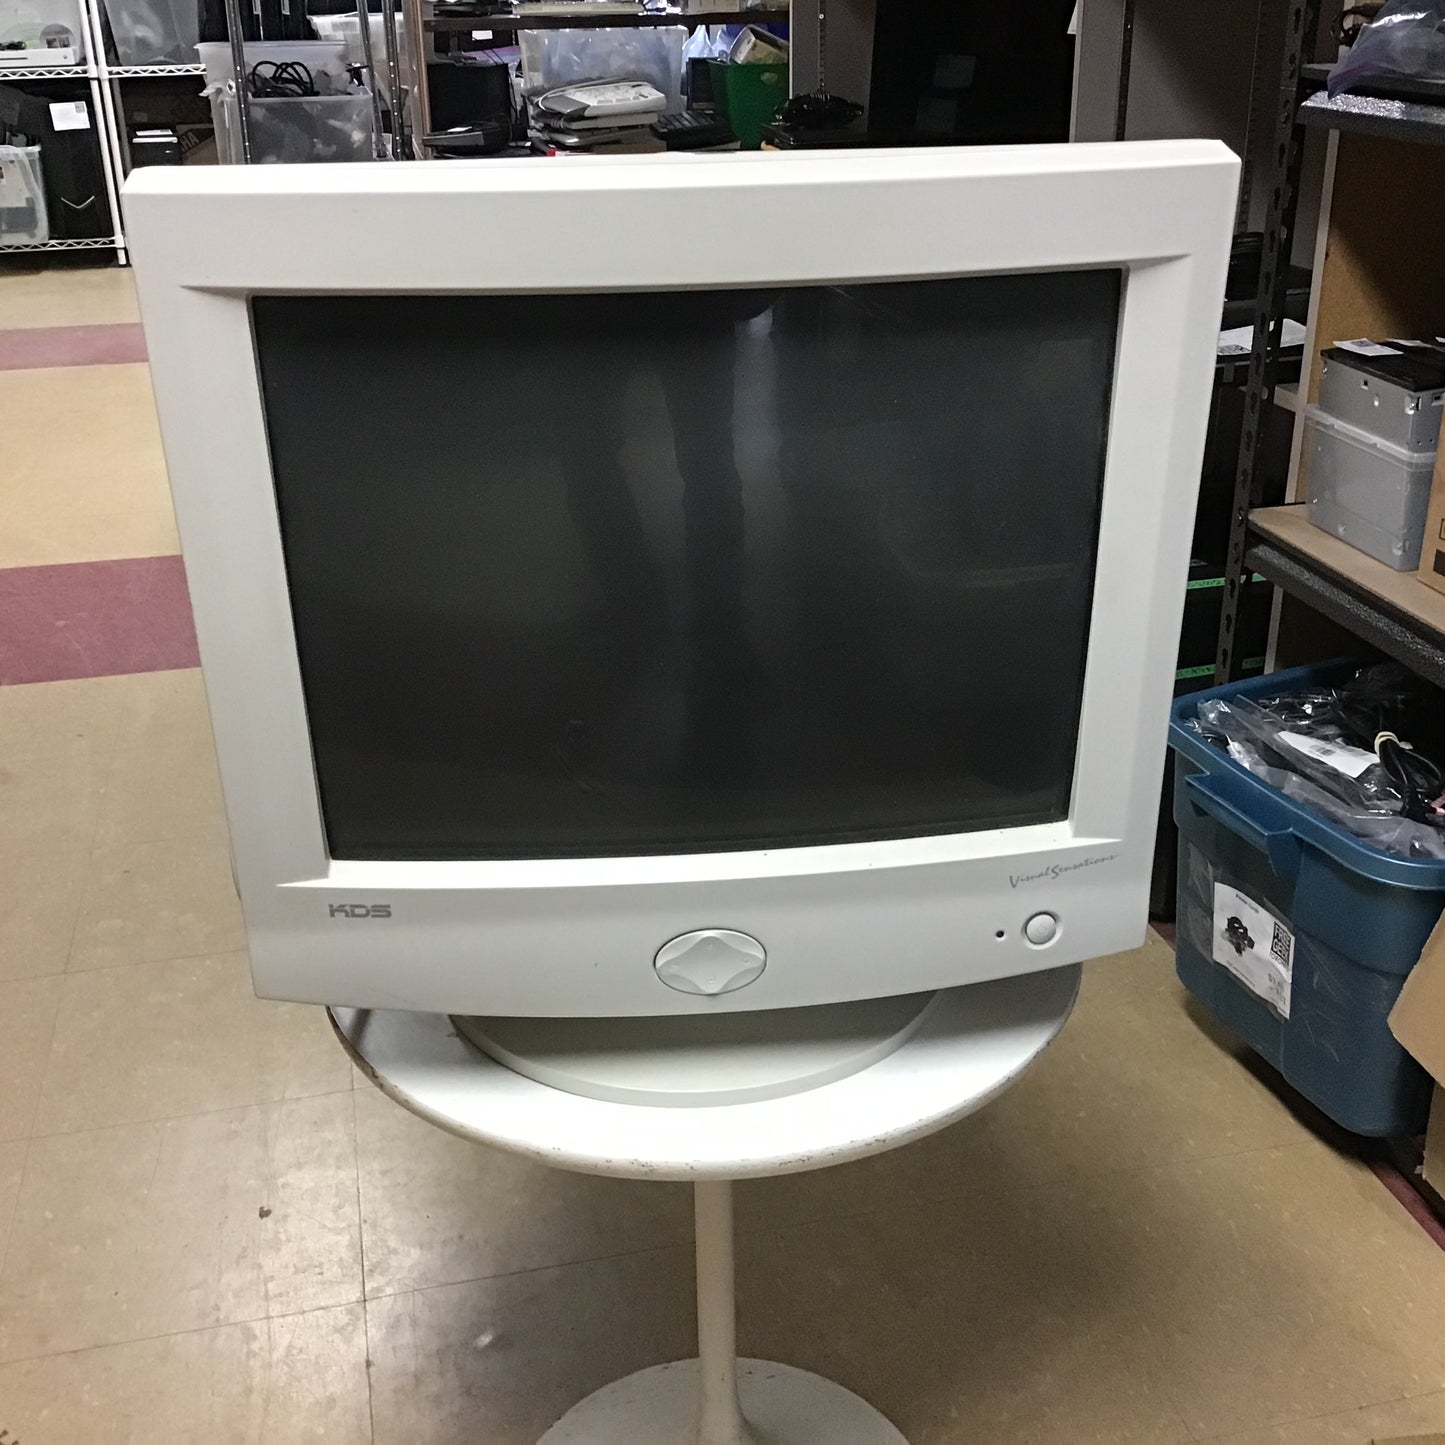 KDS CRT monitor 18"